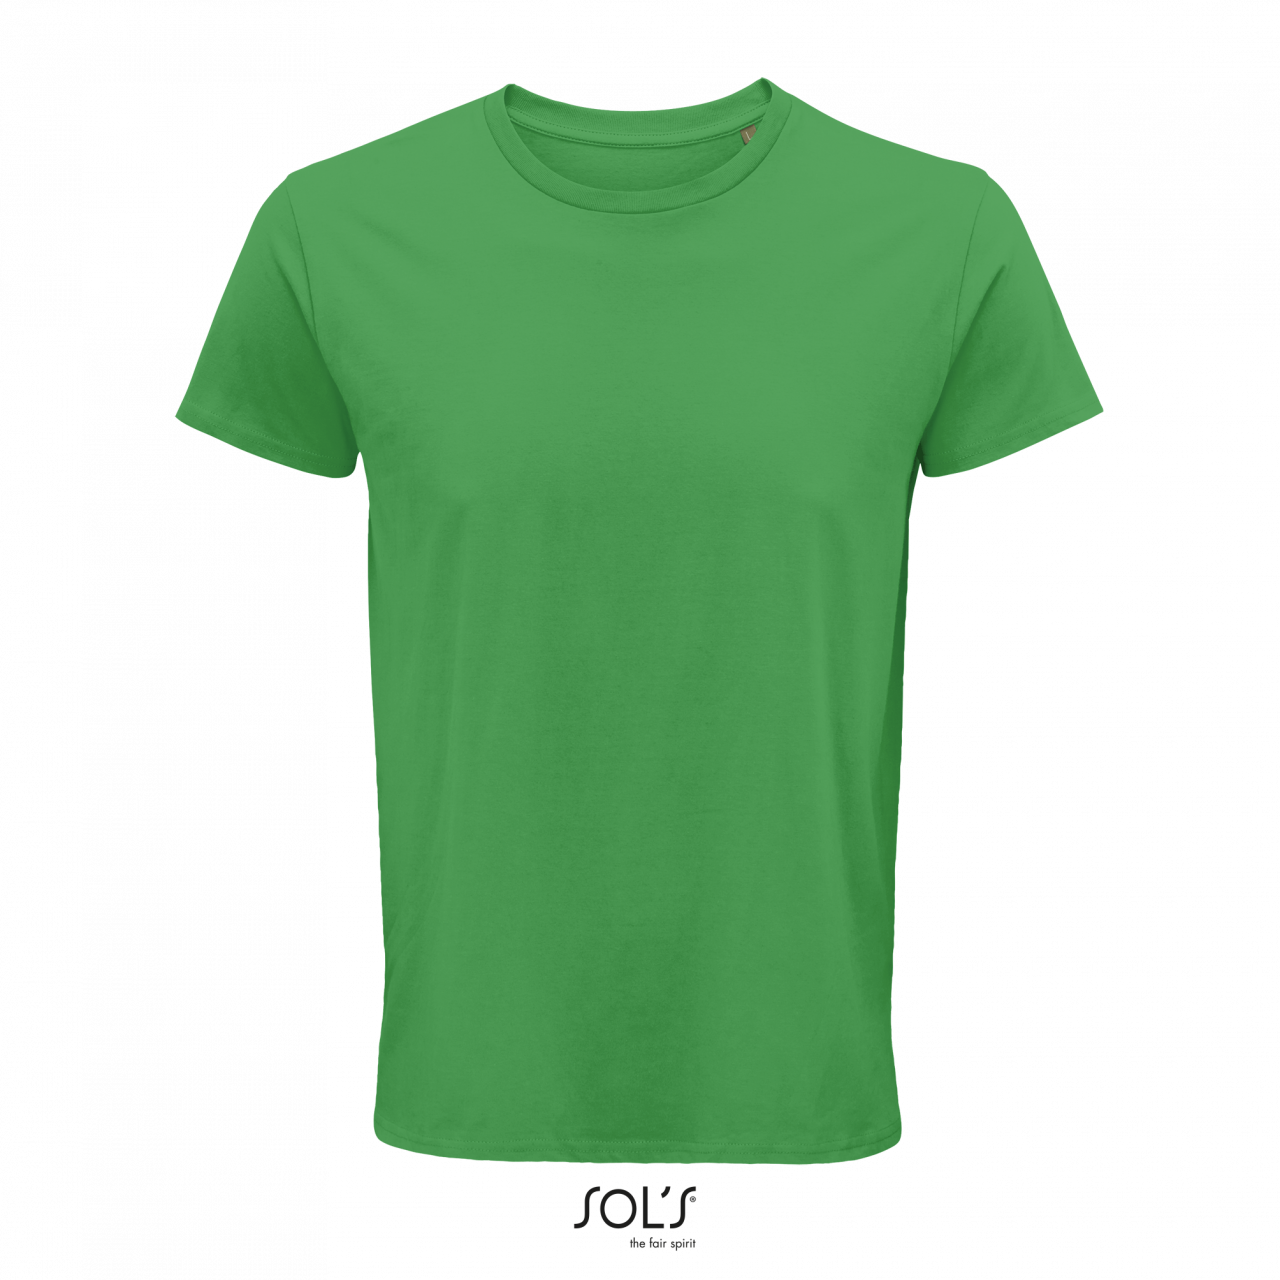 Sol's Crusader Men - Round-neck Fitted Jersey T-shirt - Sol's Crusader Men - Round-neck Fitted Jersey T-shirt - Irish Green